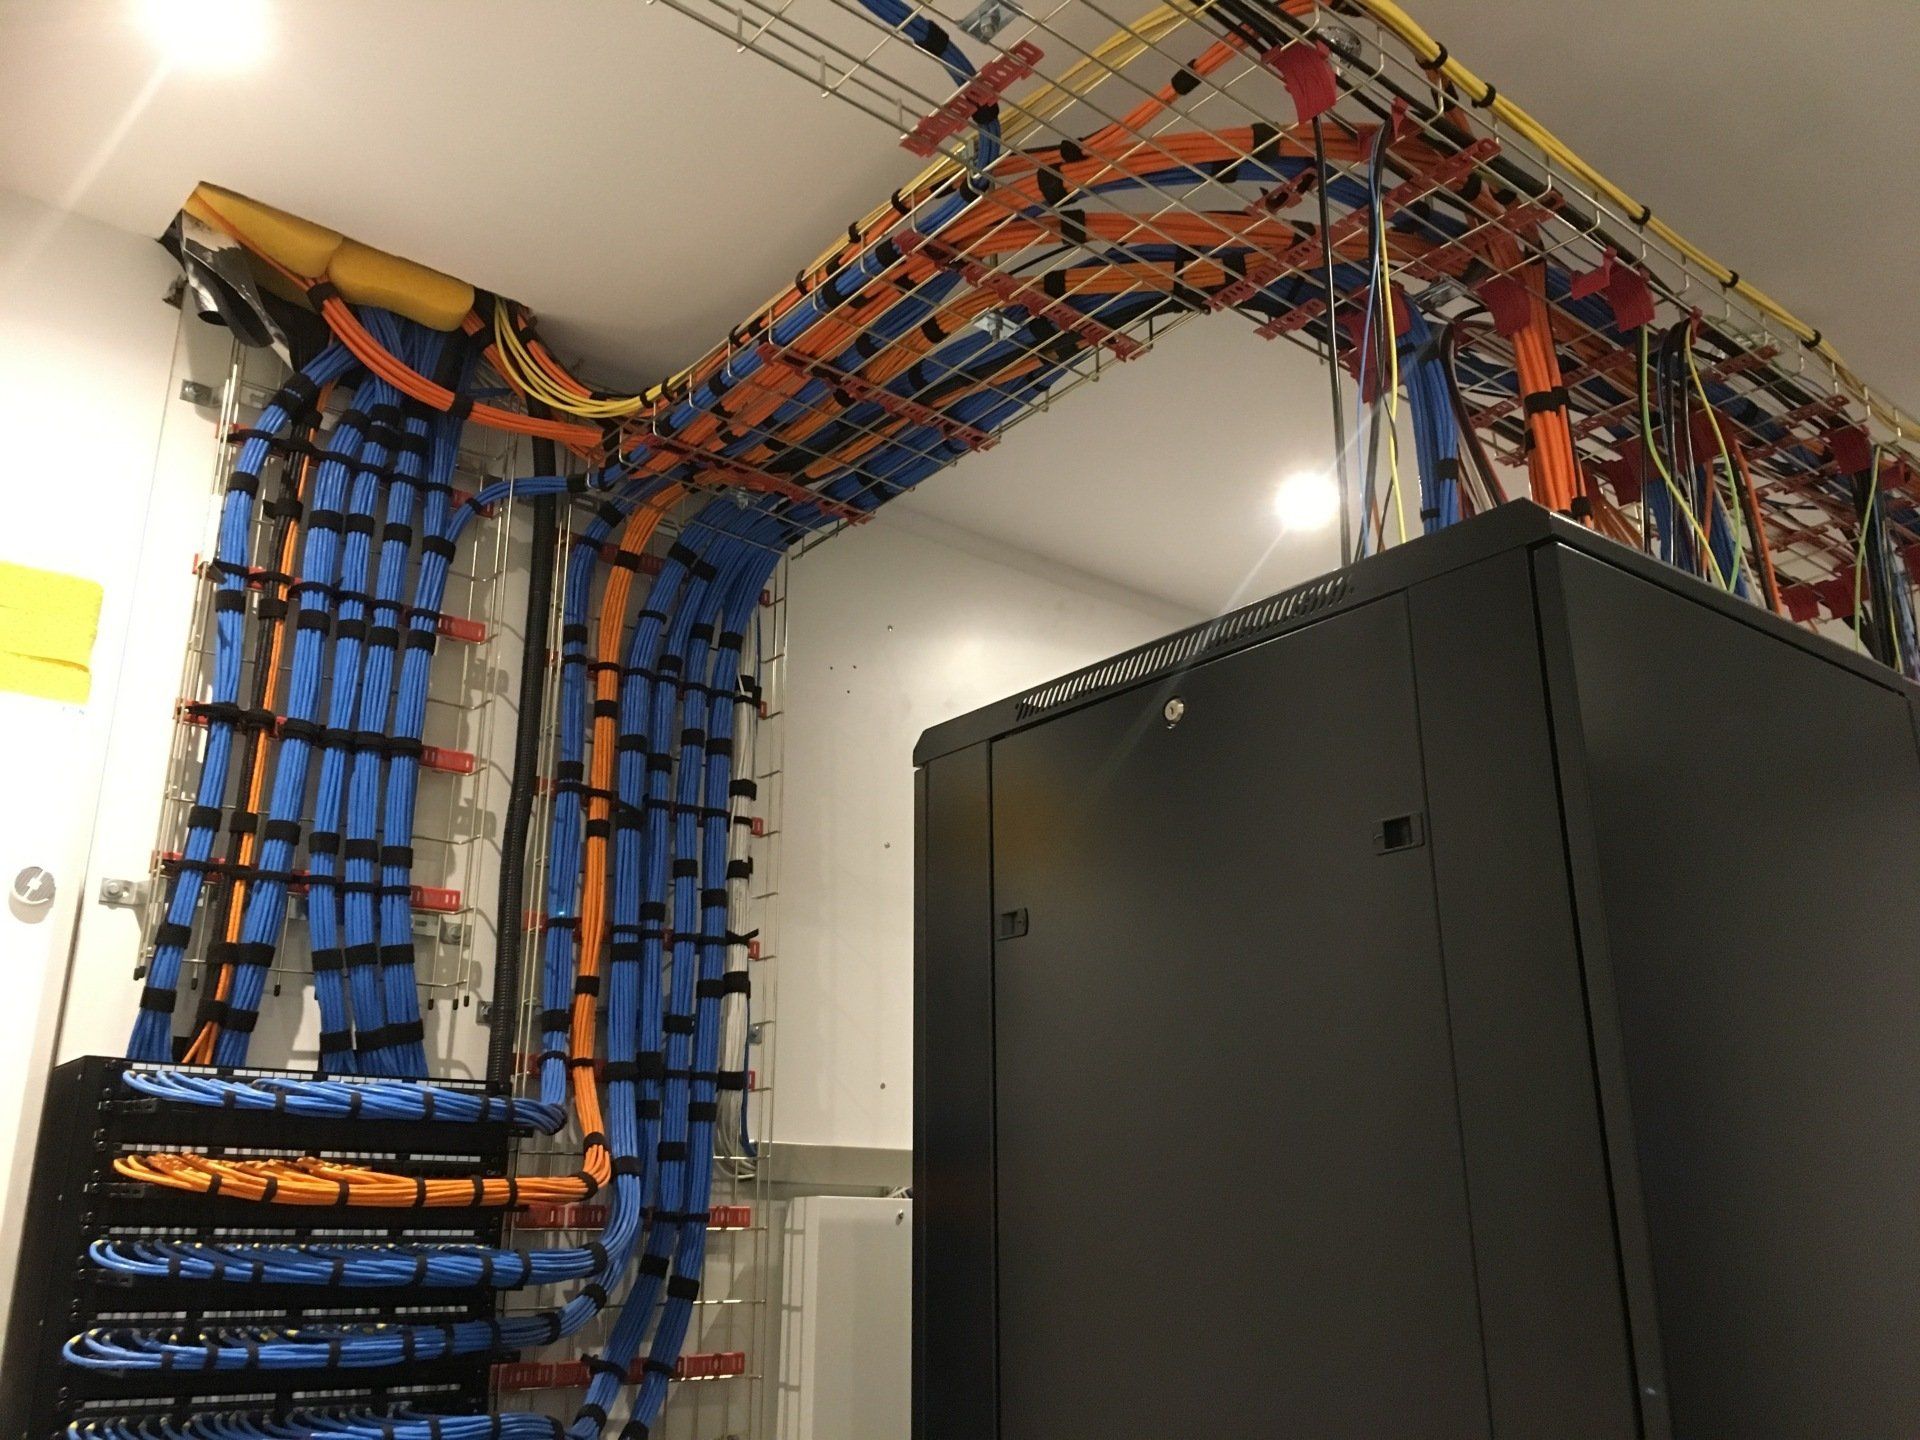 Photograph of patch cables running to server racks